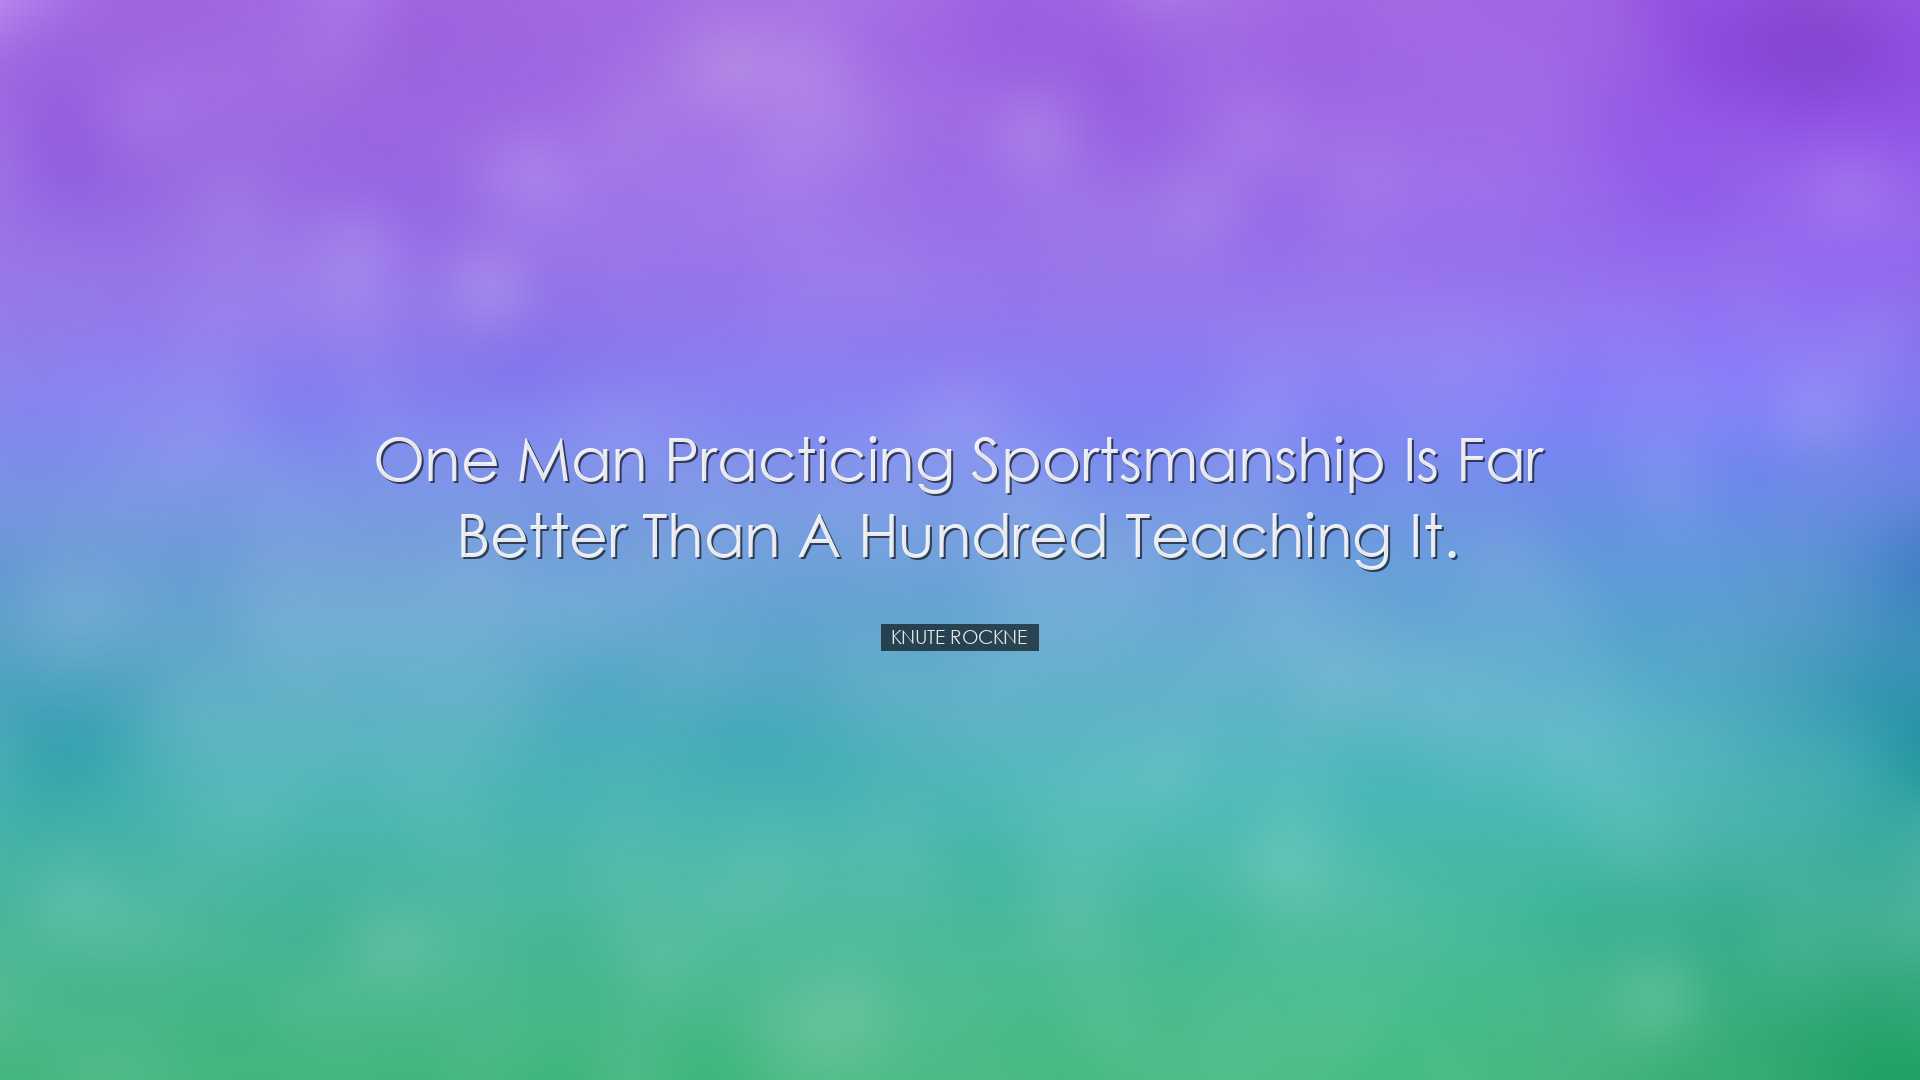 One man practicing sportsmanship is far better than a hundred teac